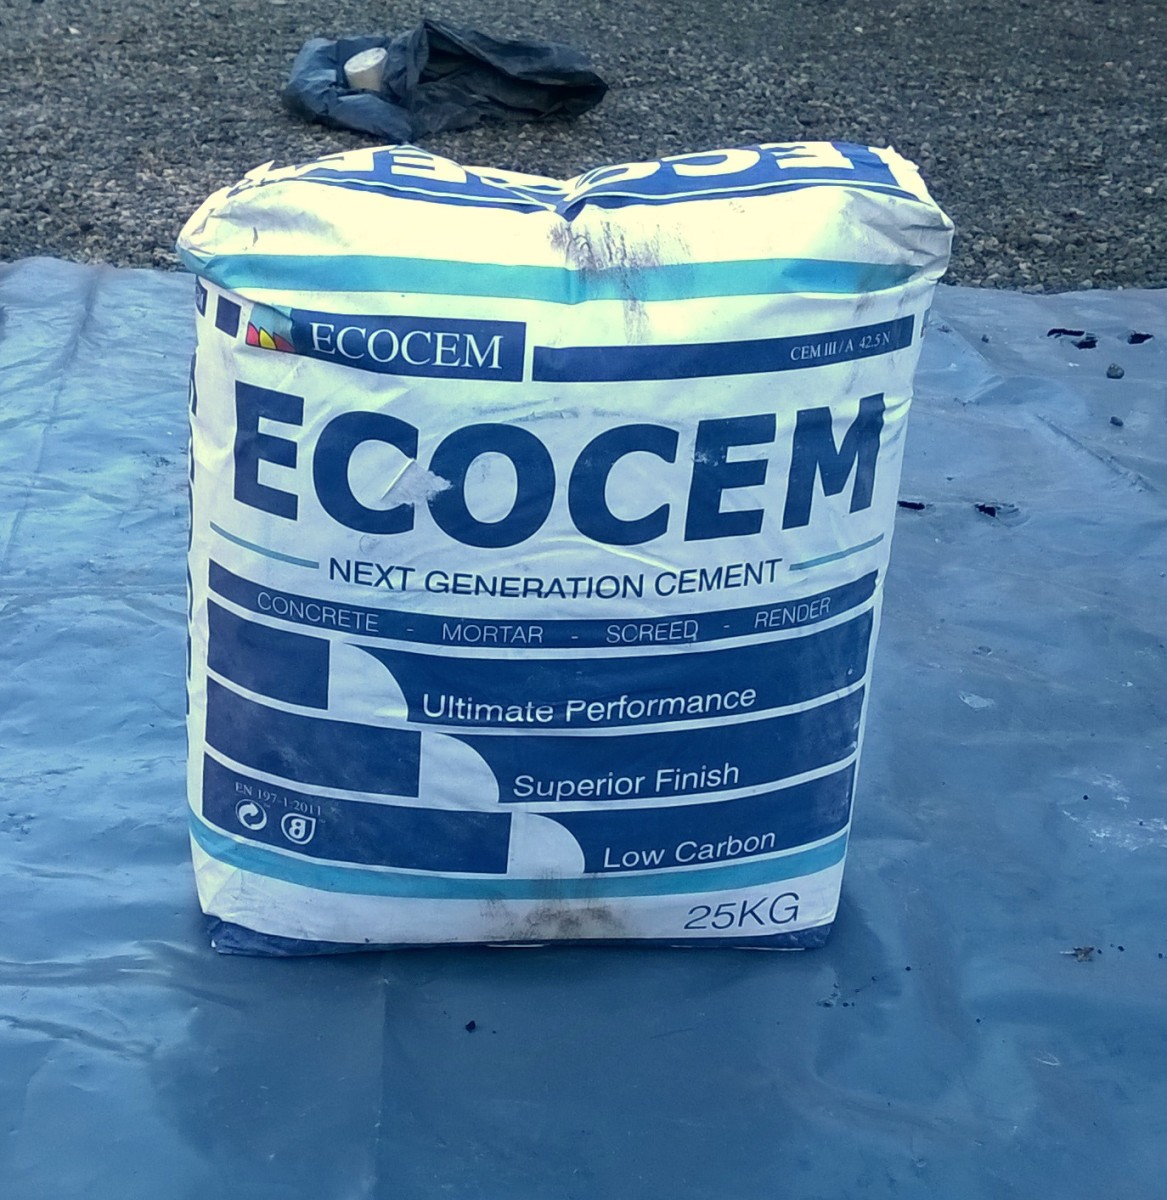 Cement is available in 25kg bags or 47/94 pound bags in the US.